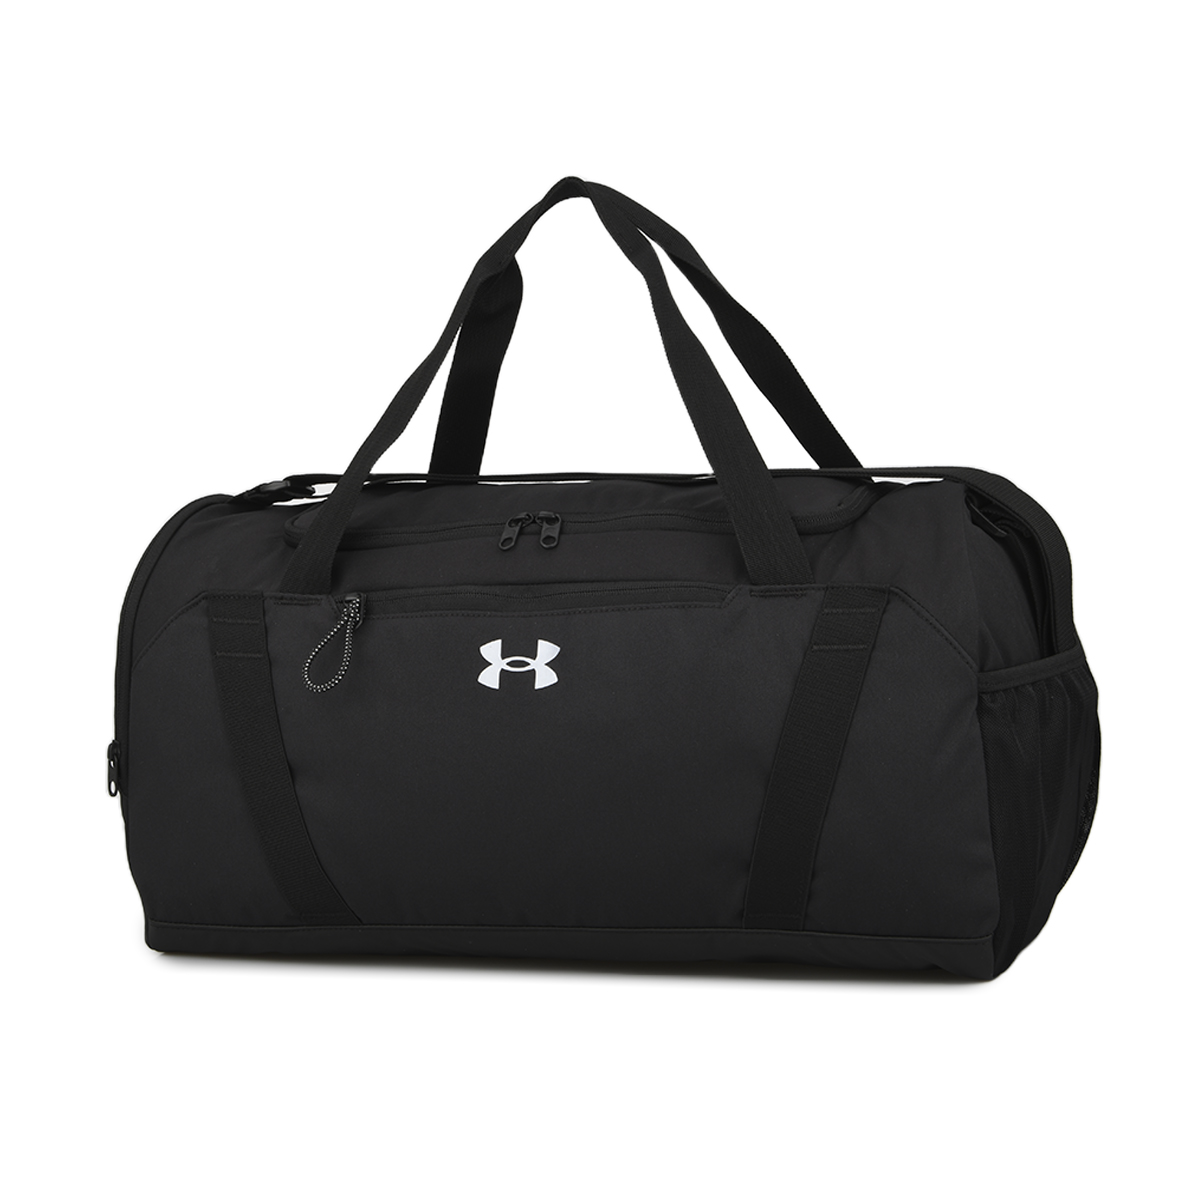 Bolso Under Armour Undeniable Signature,  image number null